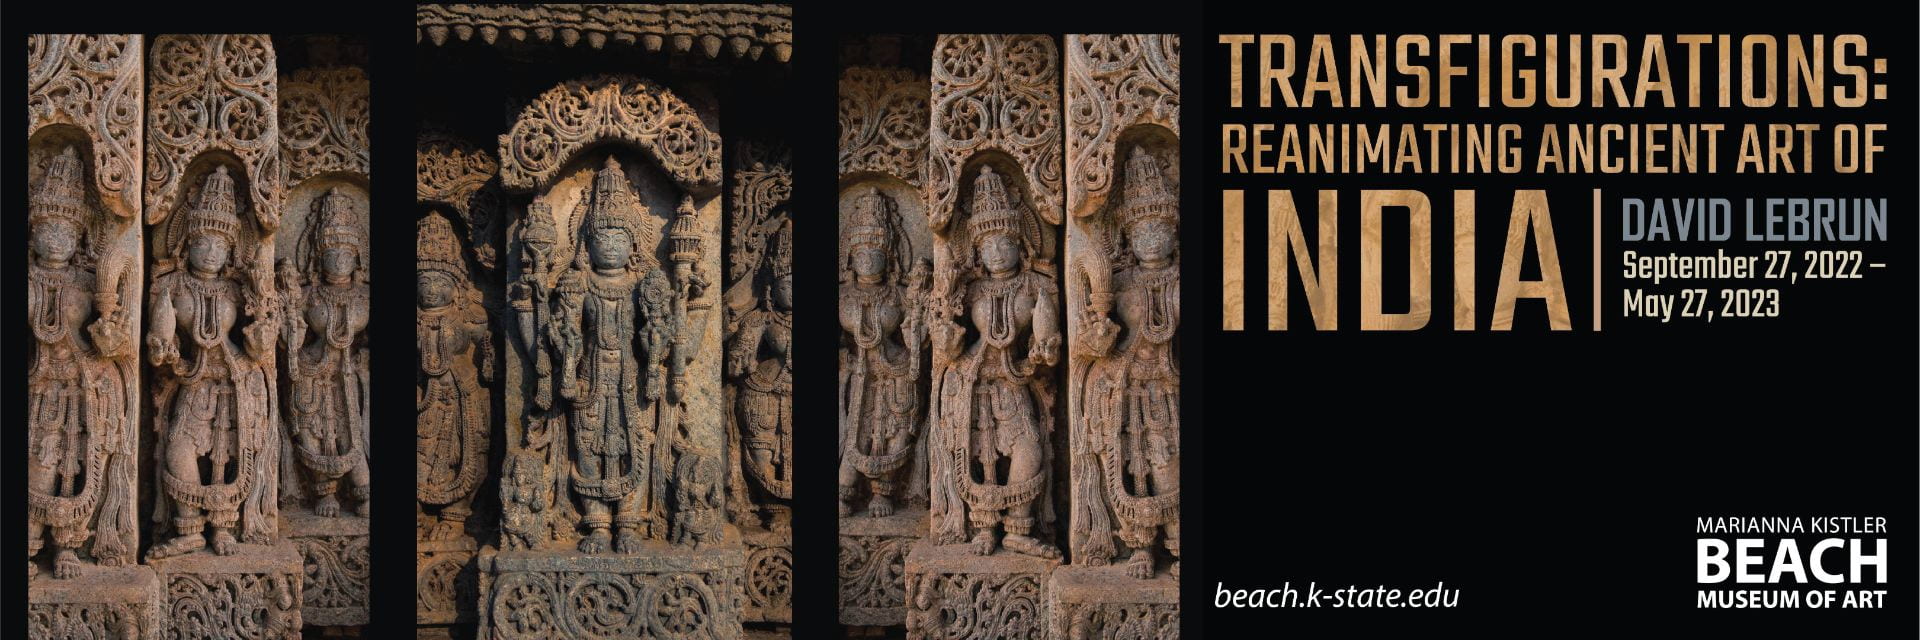 Transfigurations: Reanimating Ancient Art of India by David Lebrun